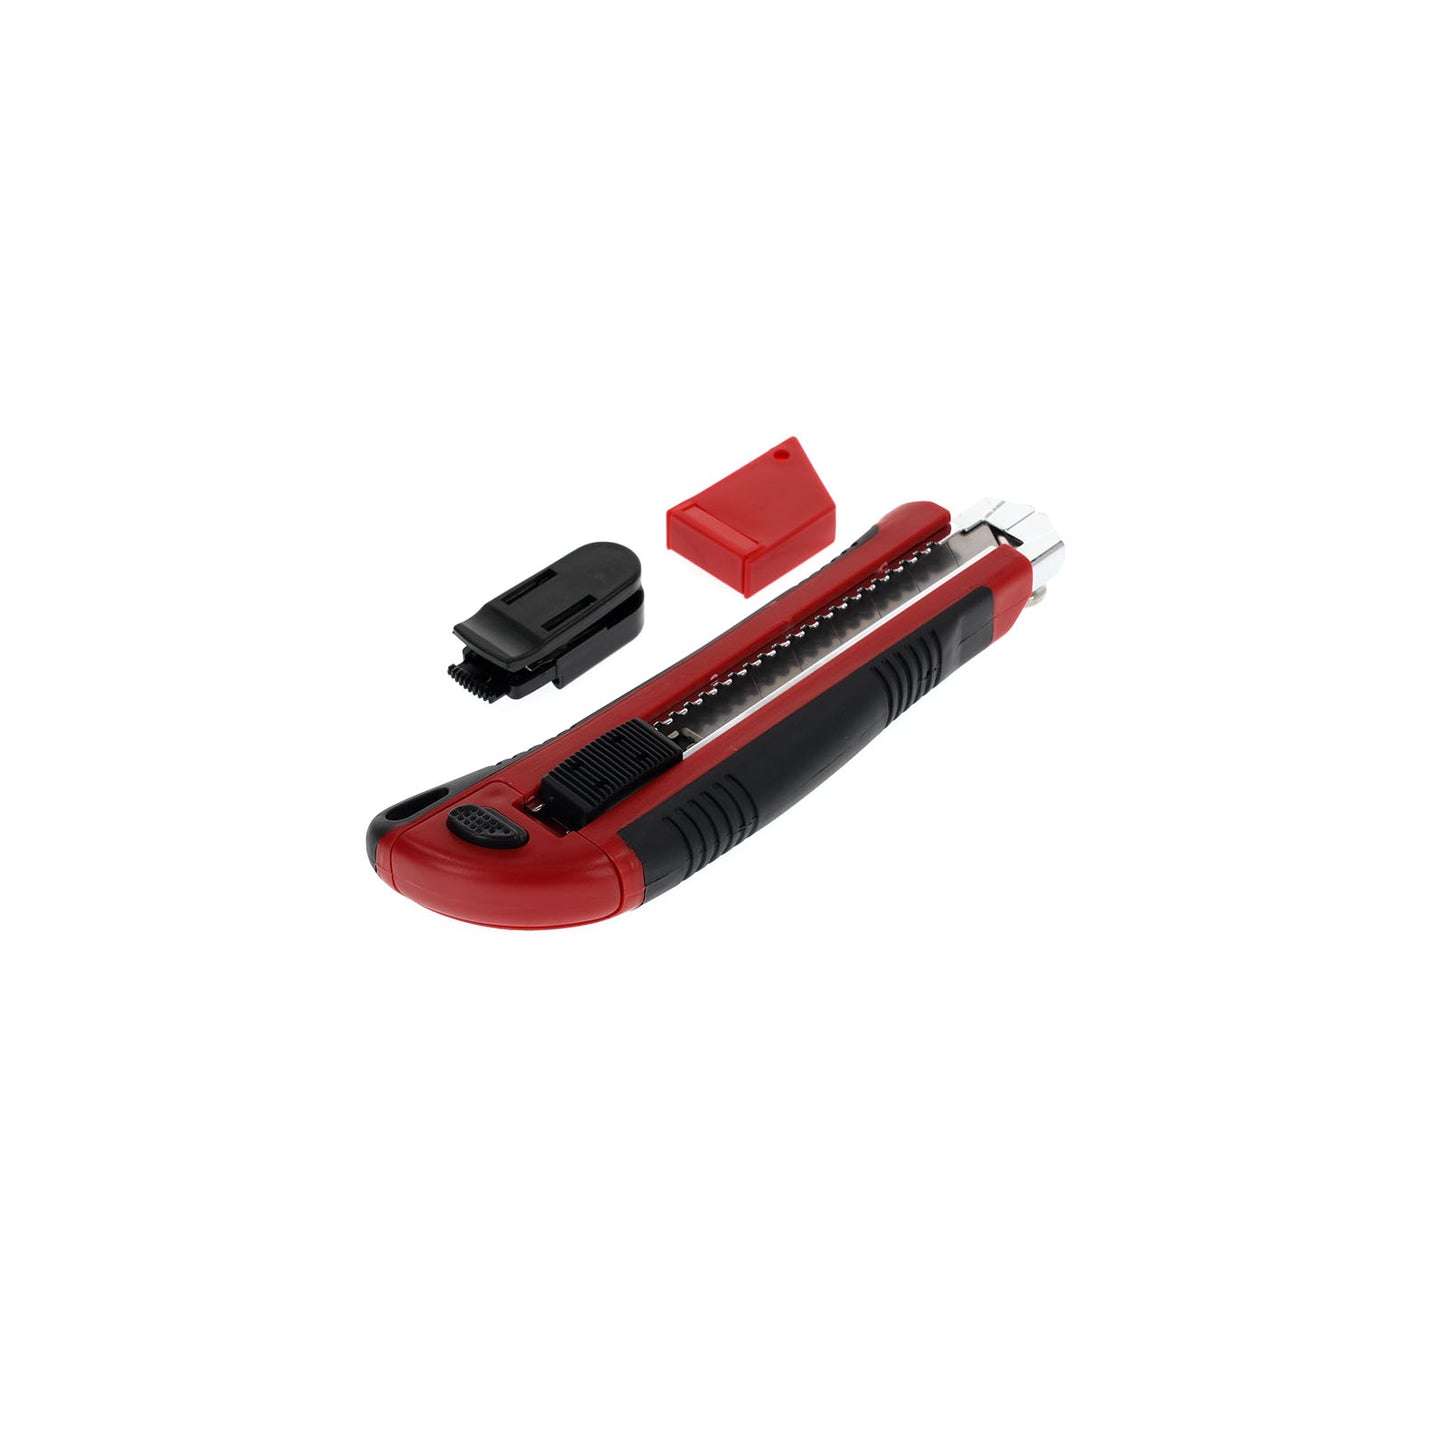 GEDORE red R93200025 - Cutter knife with 5 blades, 25 mm wide, with clip (3301605)